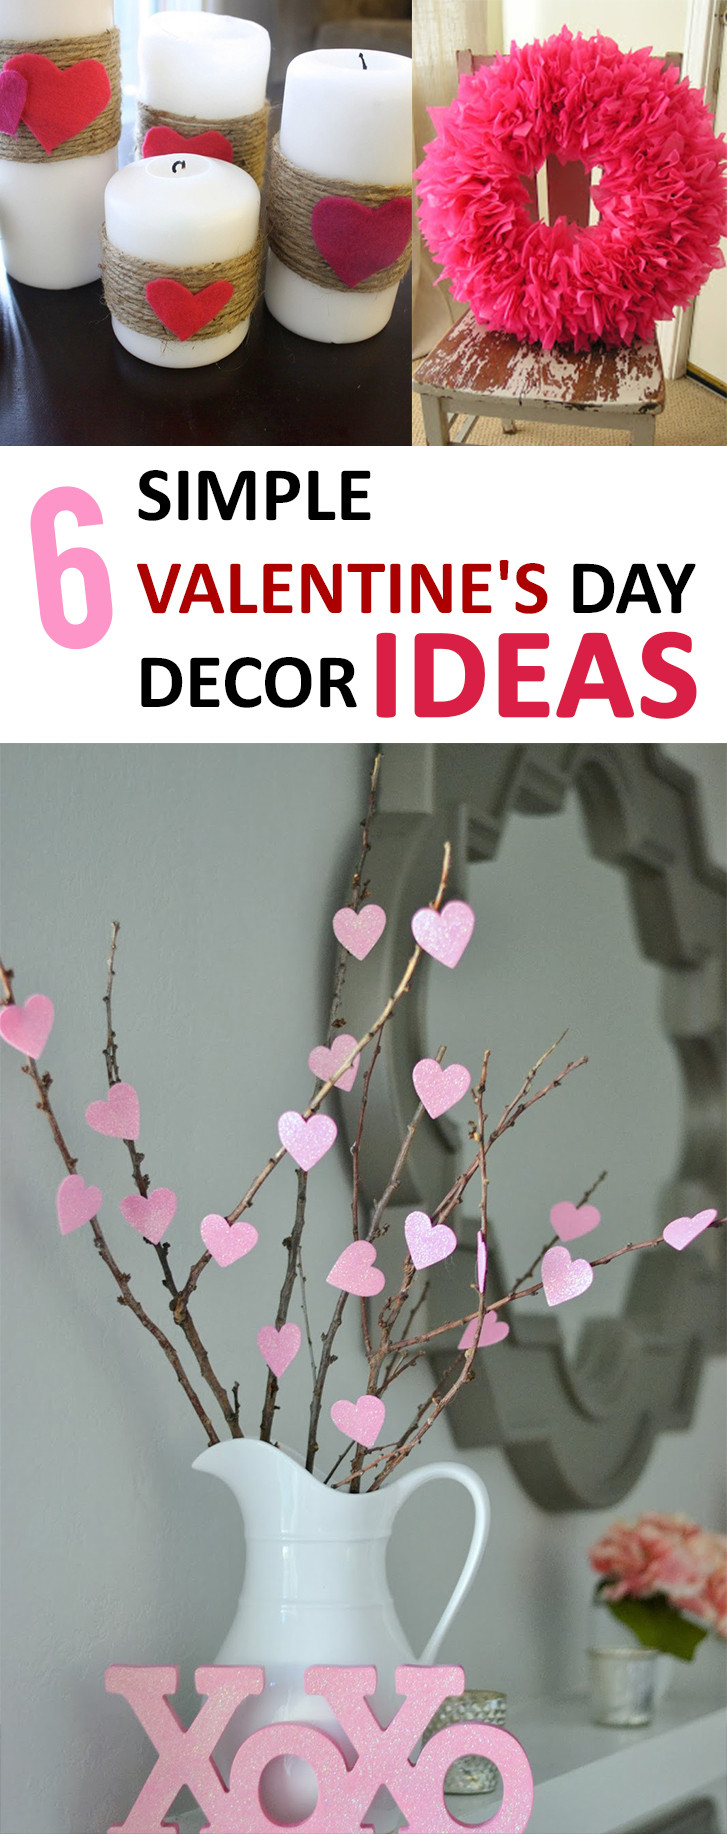 Ideas For Valentines Day
 6 Simple Valentine’s Day Décor Ideas – Sunlit Spaces